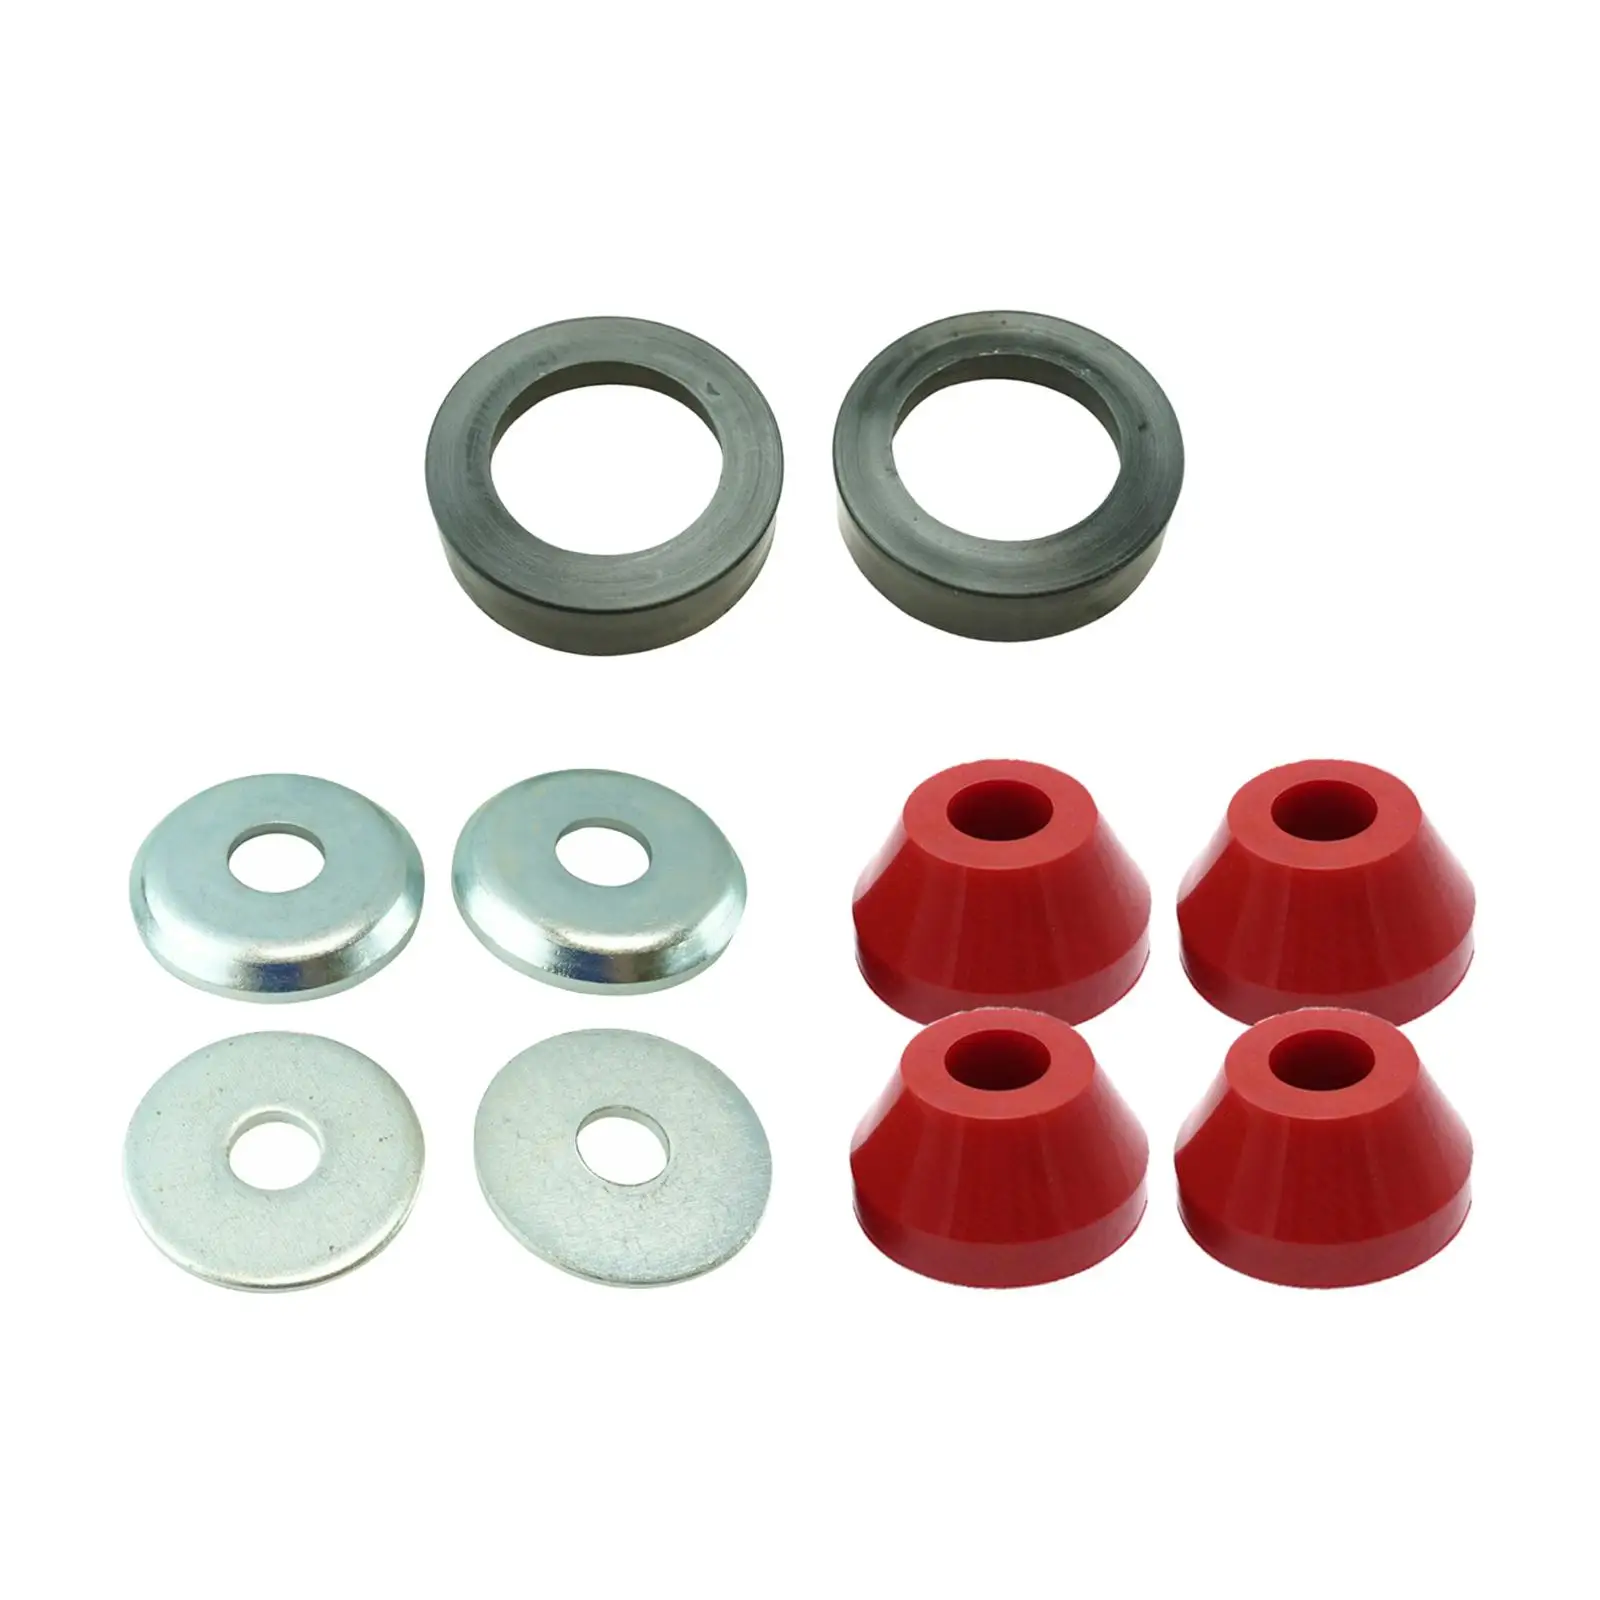 Arm Bushing Spare Parts Accessory Professional for Ranger F250